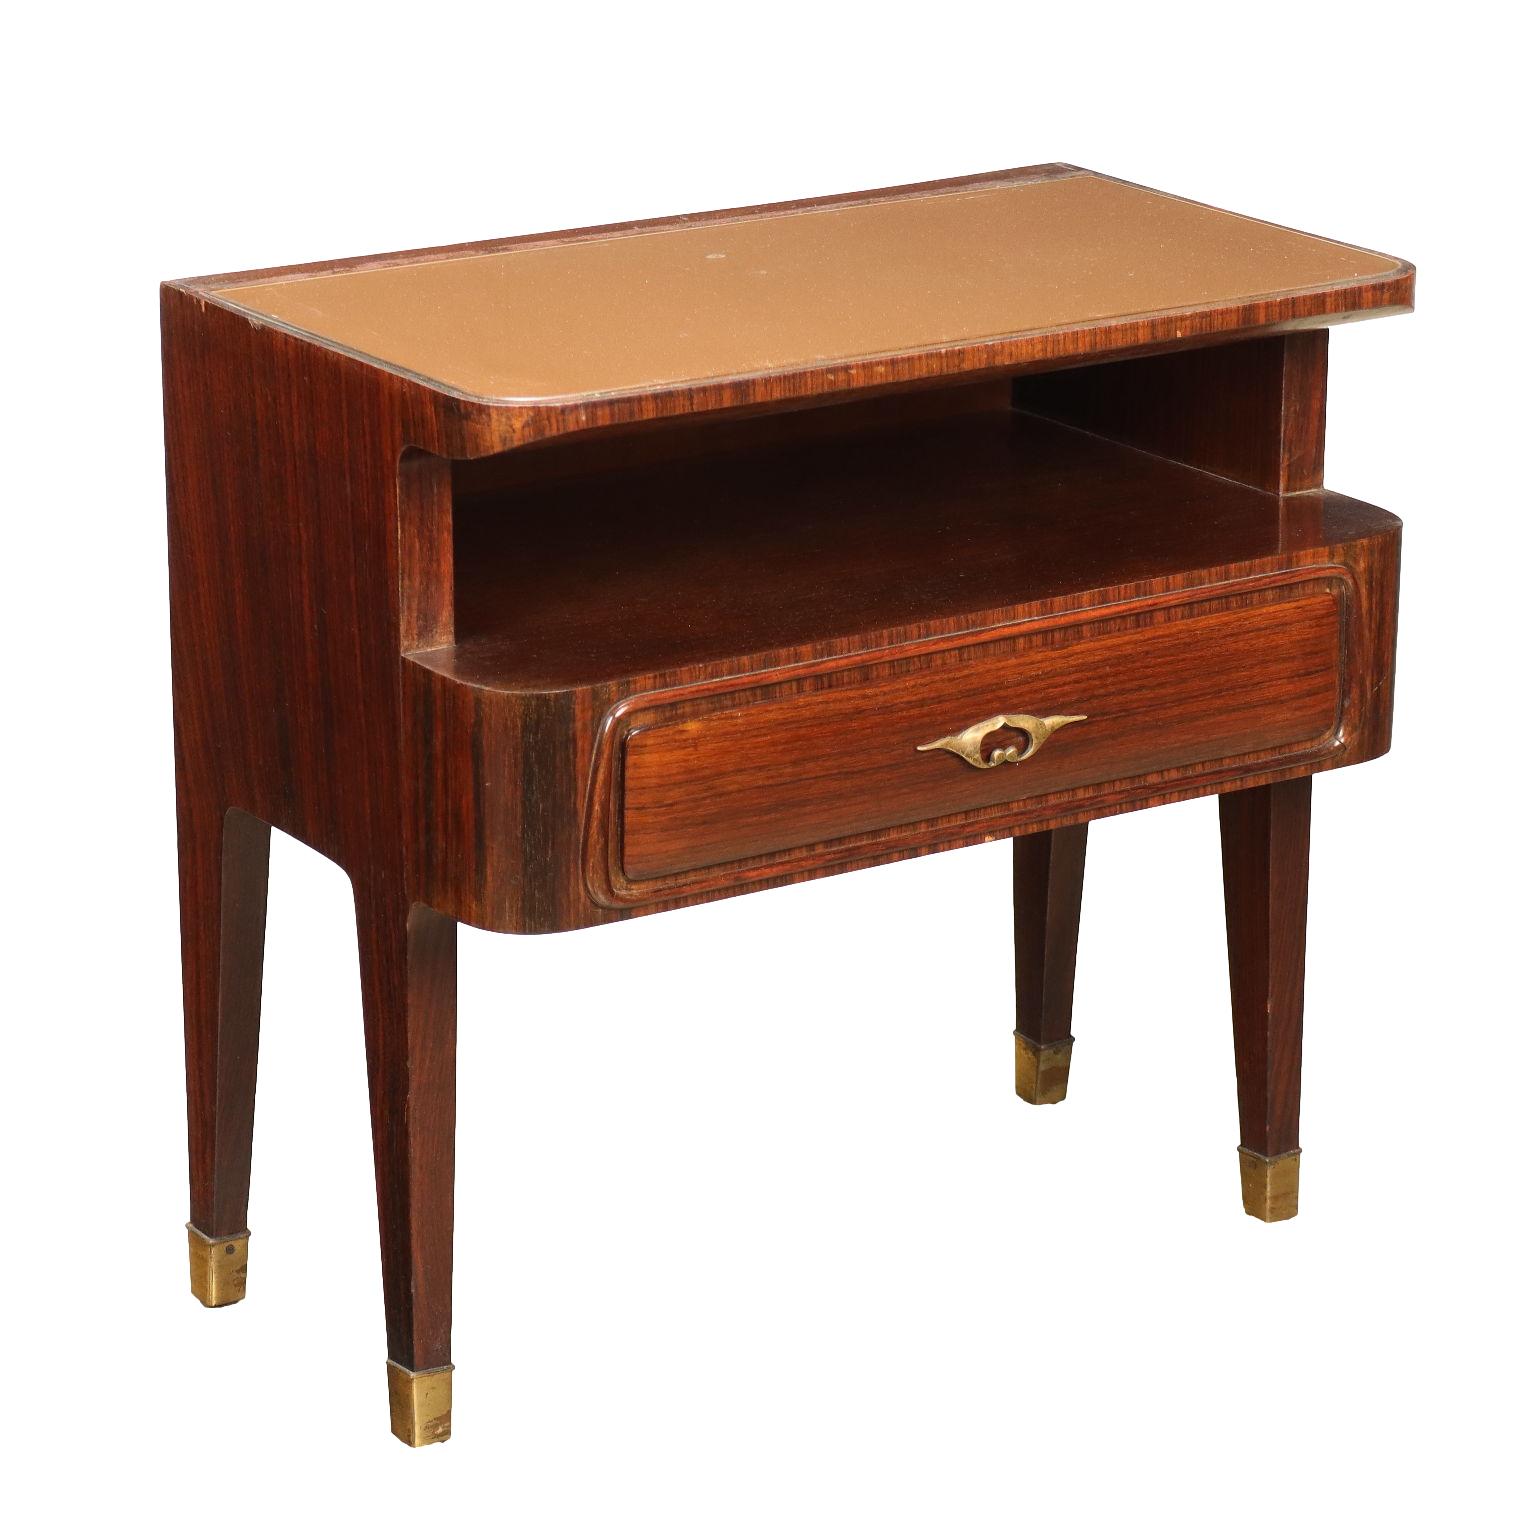 Nightstand with drawer and open compartment, exotic wood veneer, back-treated glass, brass. Good conditions.